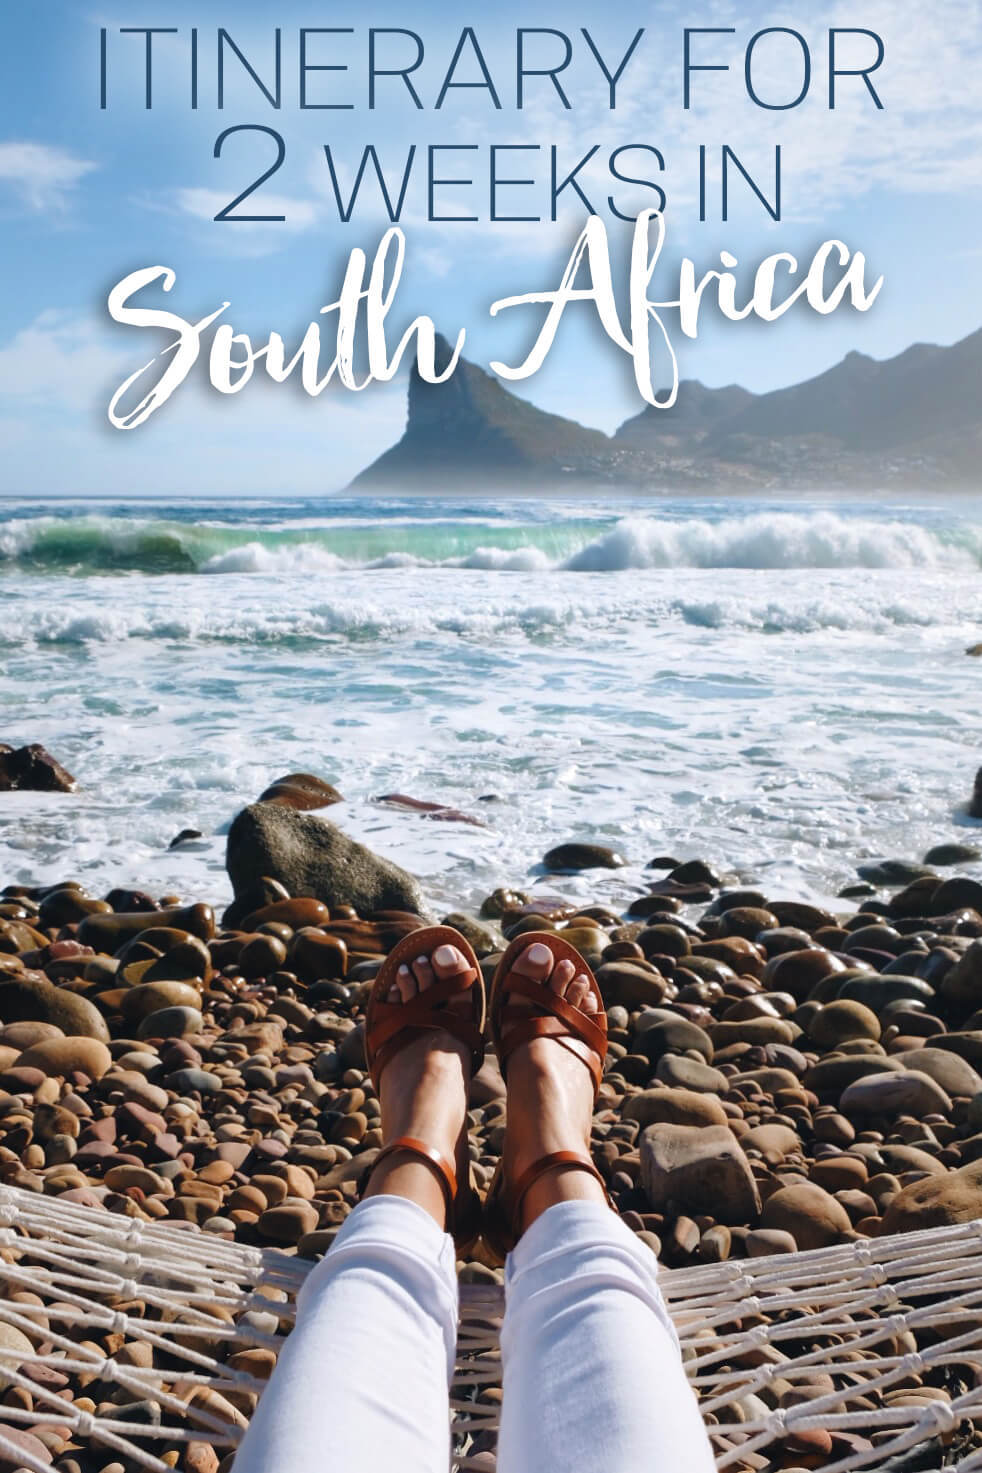 Itinerary for 2 Weeks in South Africa